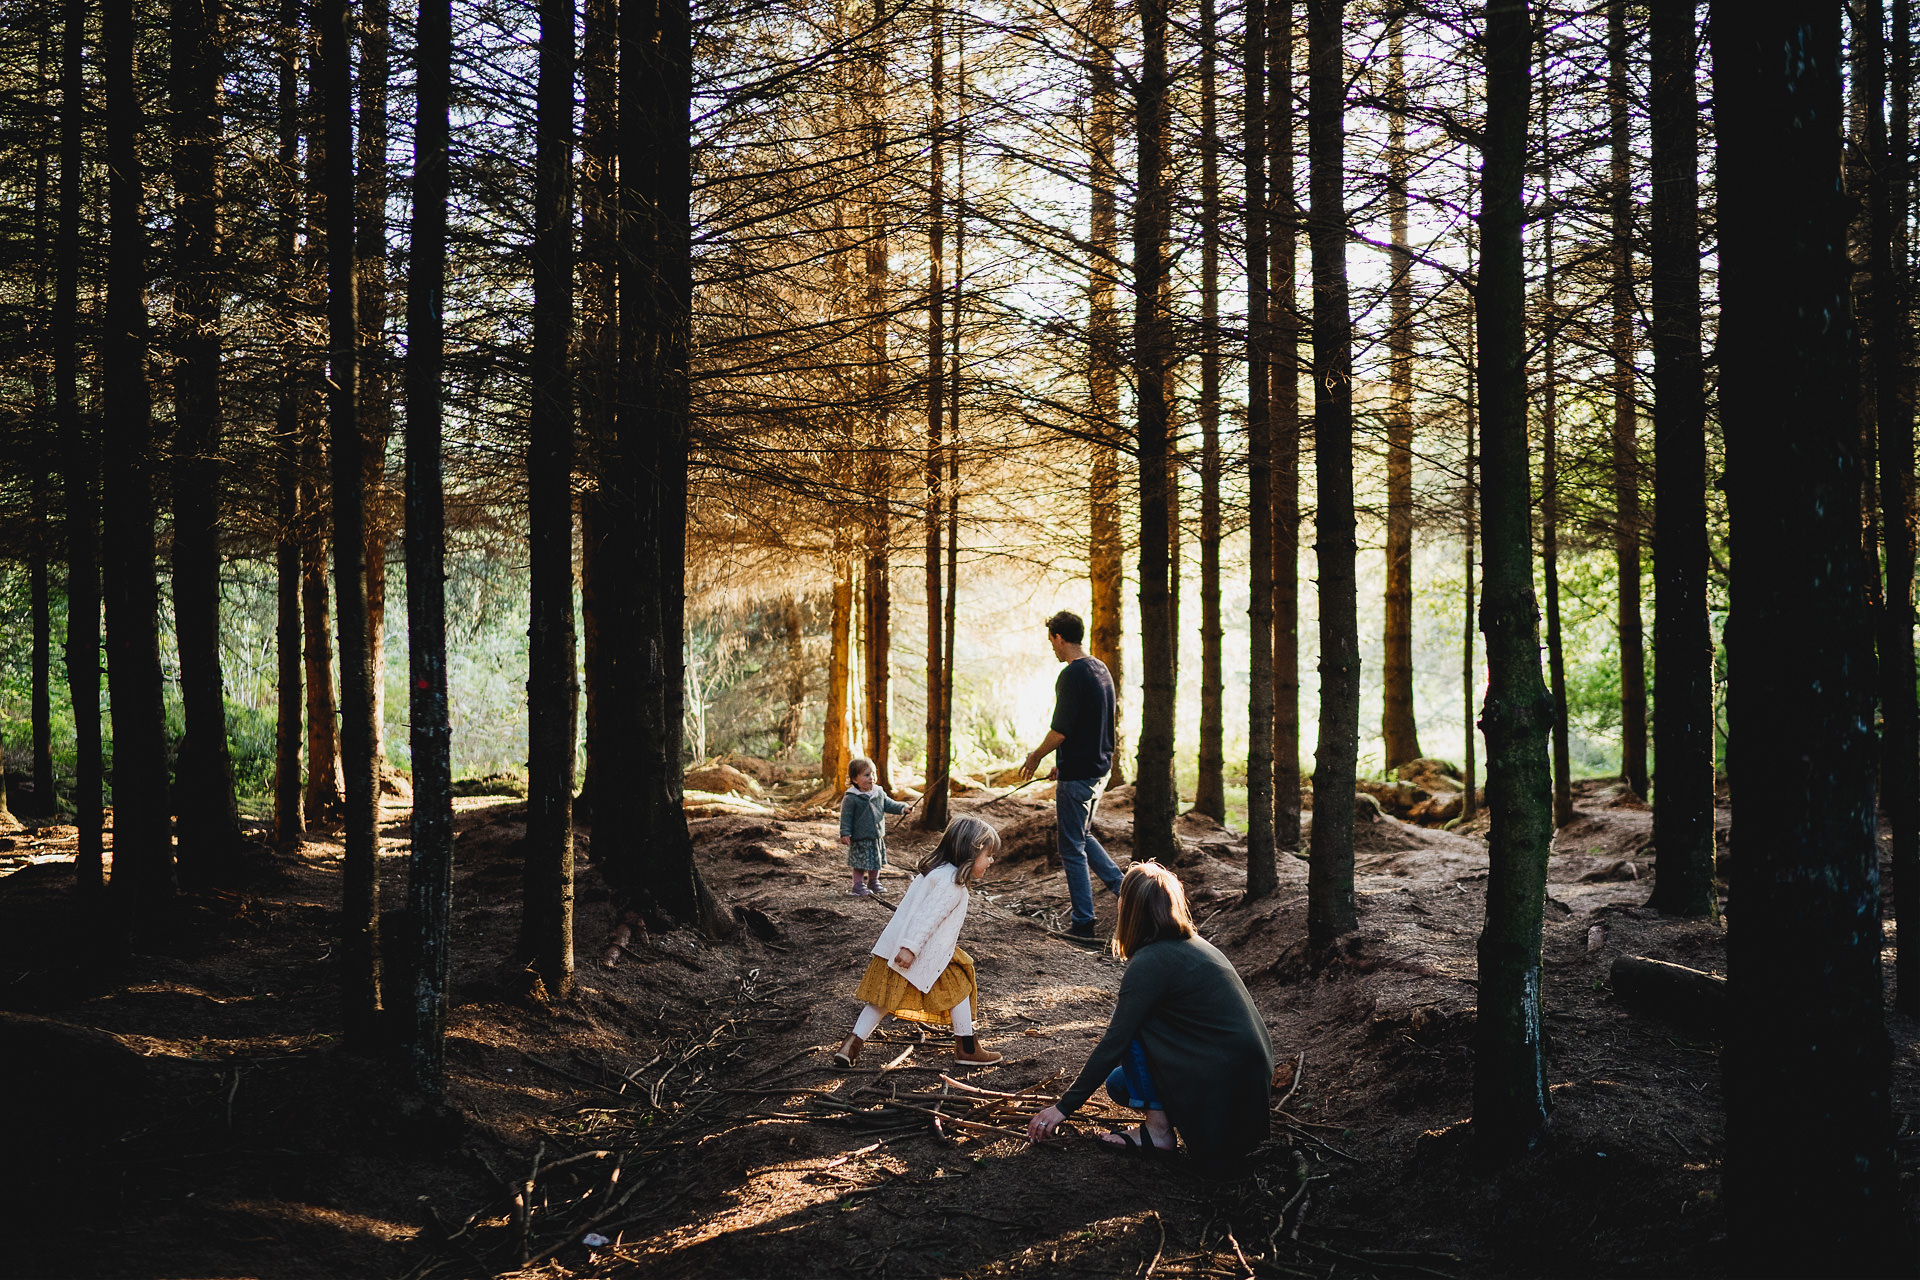 A family exploring the woods in evening light